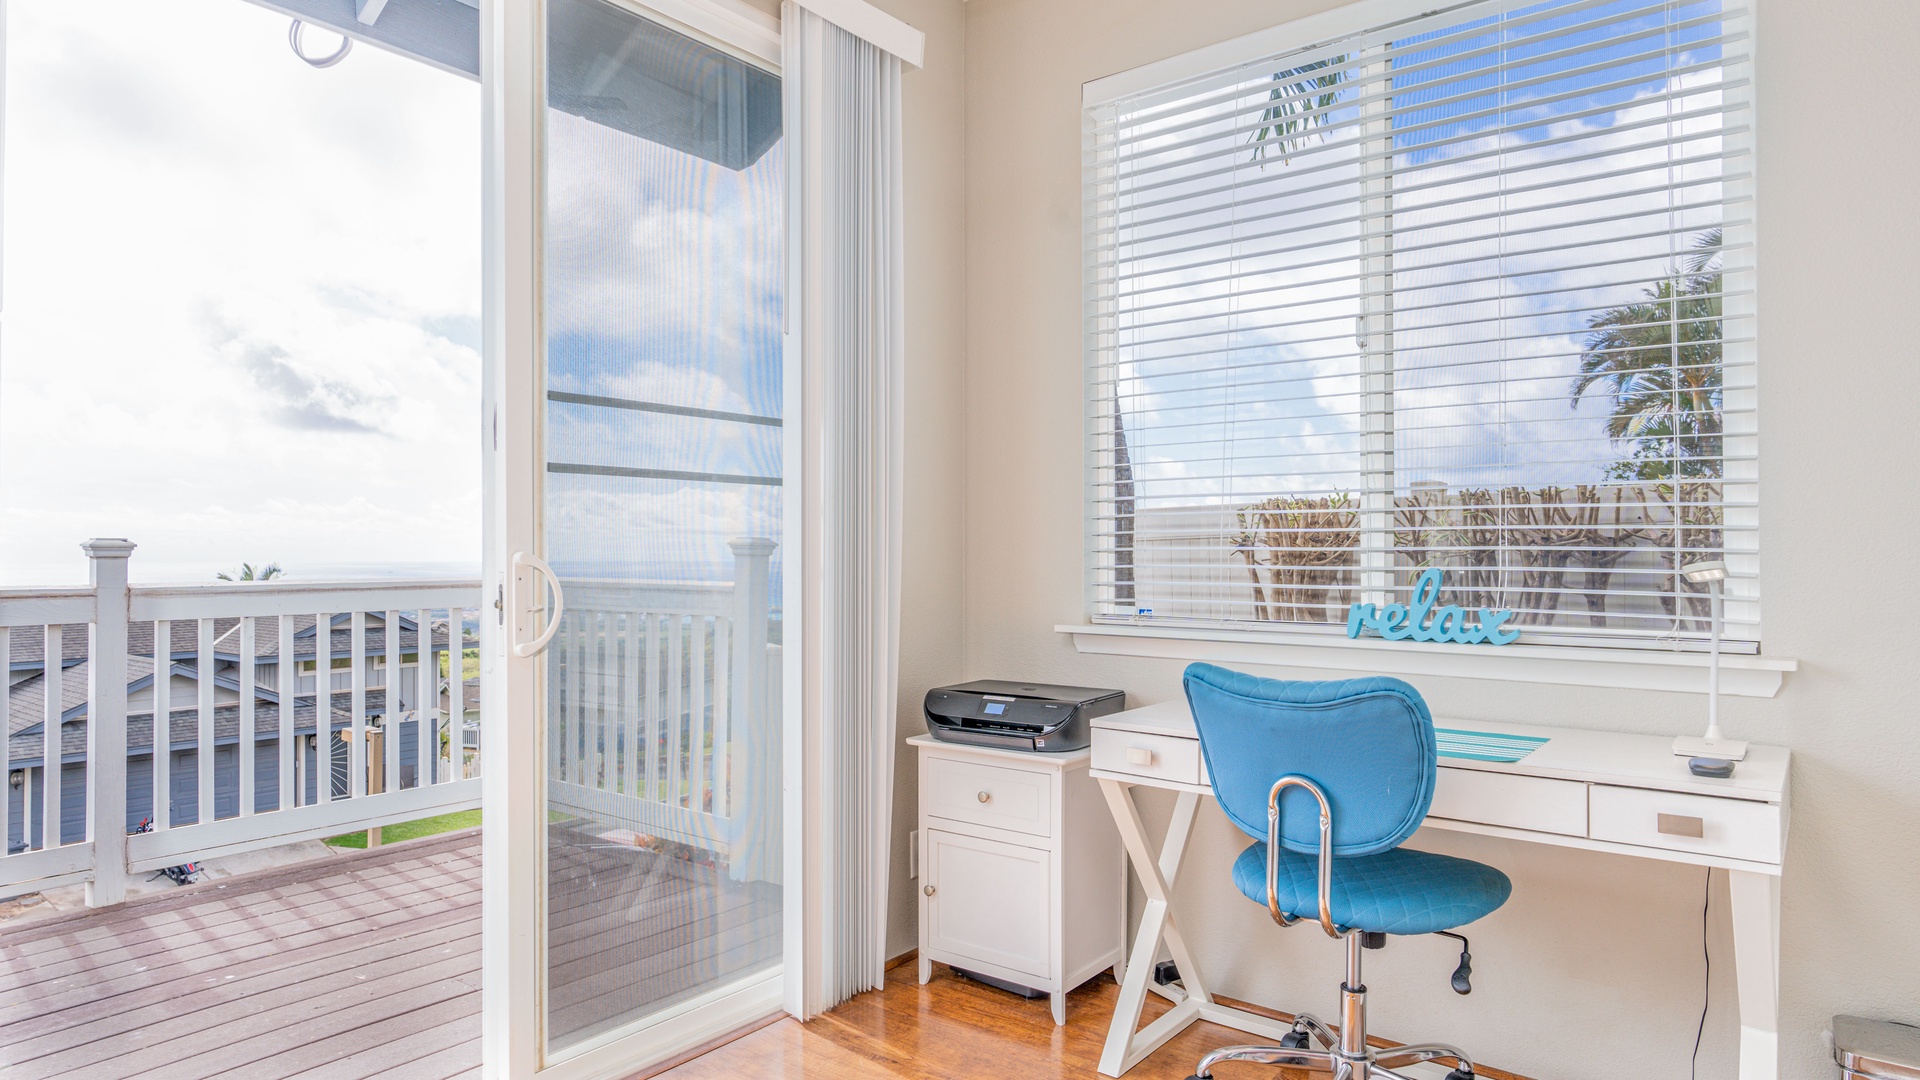 Kapolei Vacation Rentals, Makakilo Elele 48 - 11A dedicated workspace for you to stay productive while away, with a convenient direct access to private lanai.